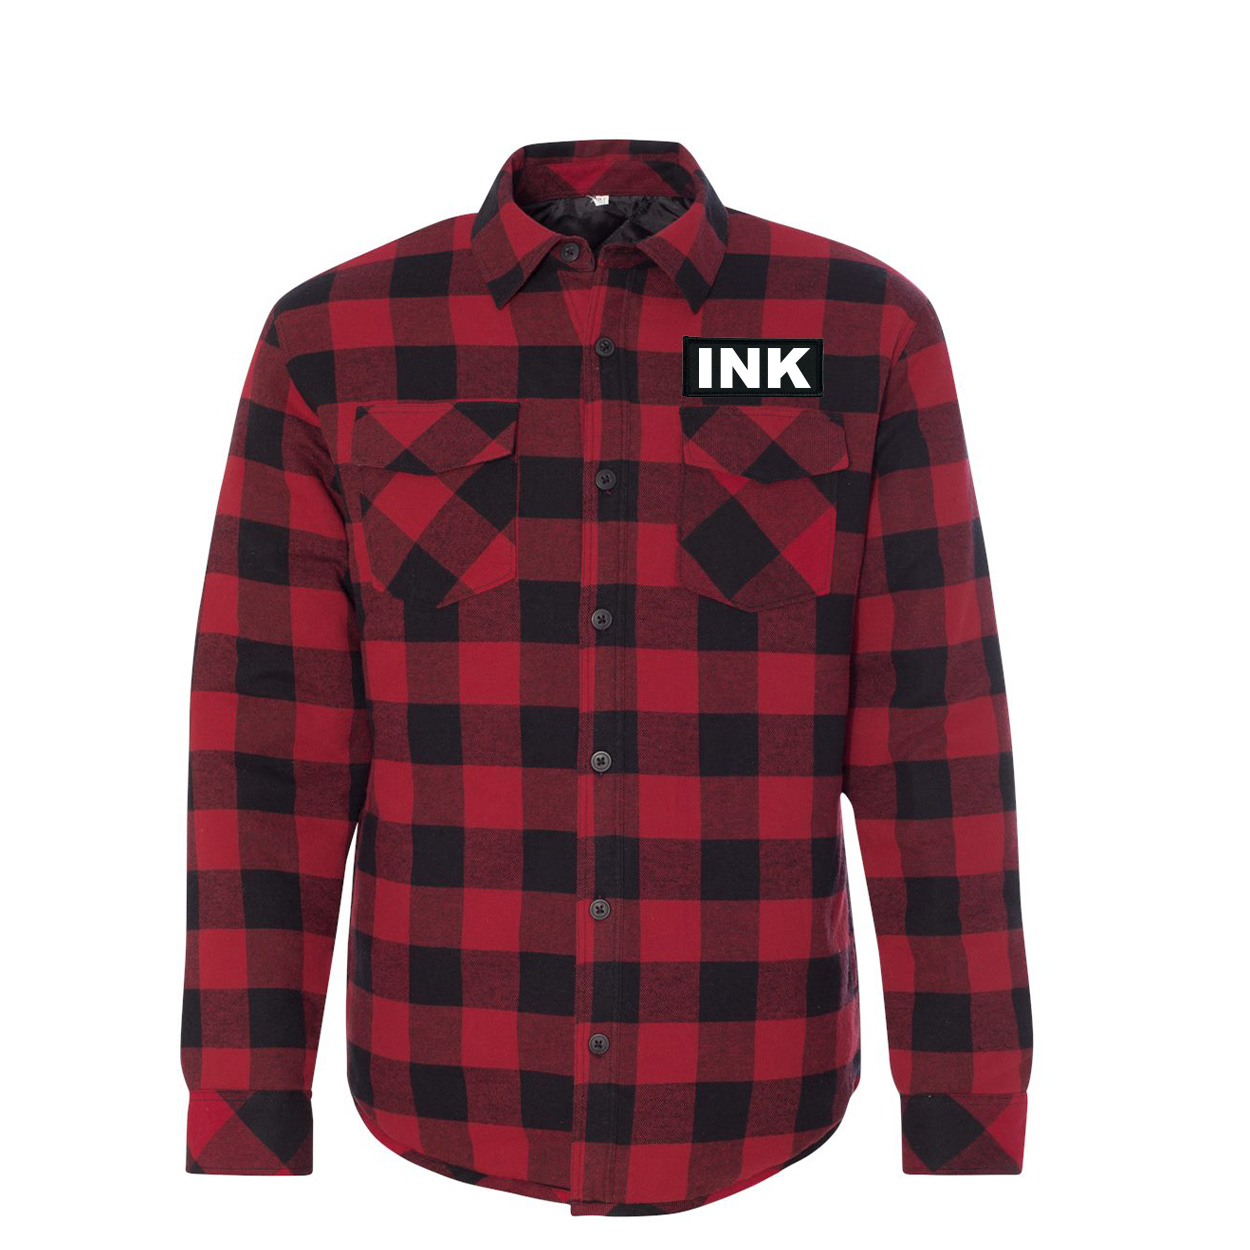 Ink Brand Logo Classic Unisex Woven Patch Quilted Button Flannel Jacket Red/Black Buffalo (White Logo)